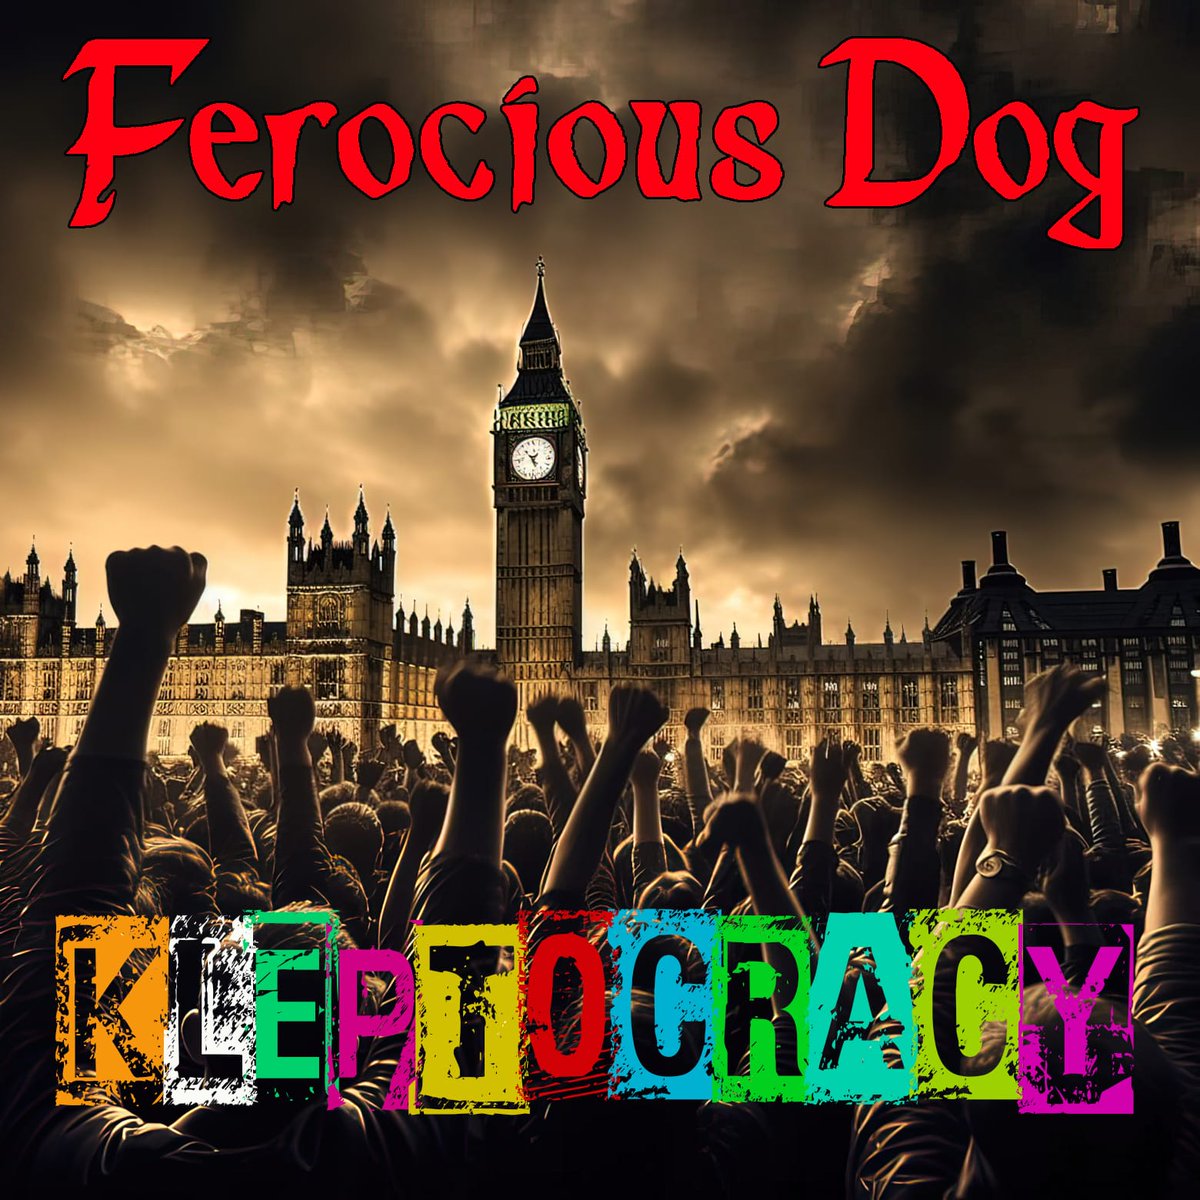 🎶MUSIC REVIEW🎶 @ferociousdog - Kleptocracy Release Date: OUT NOW “There's anthemic, singalong choruses and big, bouncy tunes...Lyrically however, it's a very dark and angry album.' Read the full review on the ERB website now. emergingrockbands.co.uk/music-review-f… #NewMusic #MusicReview